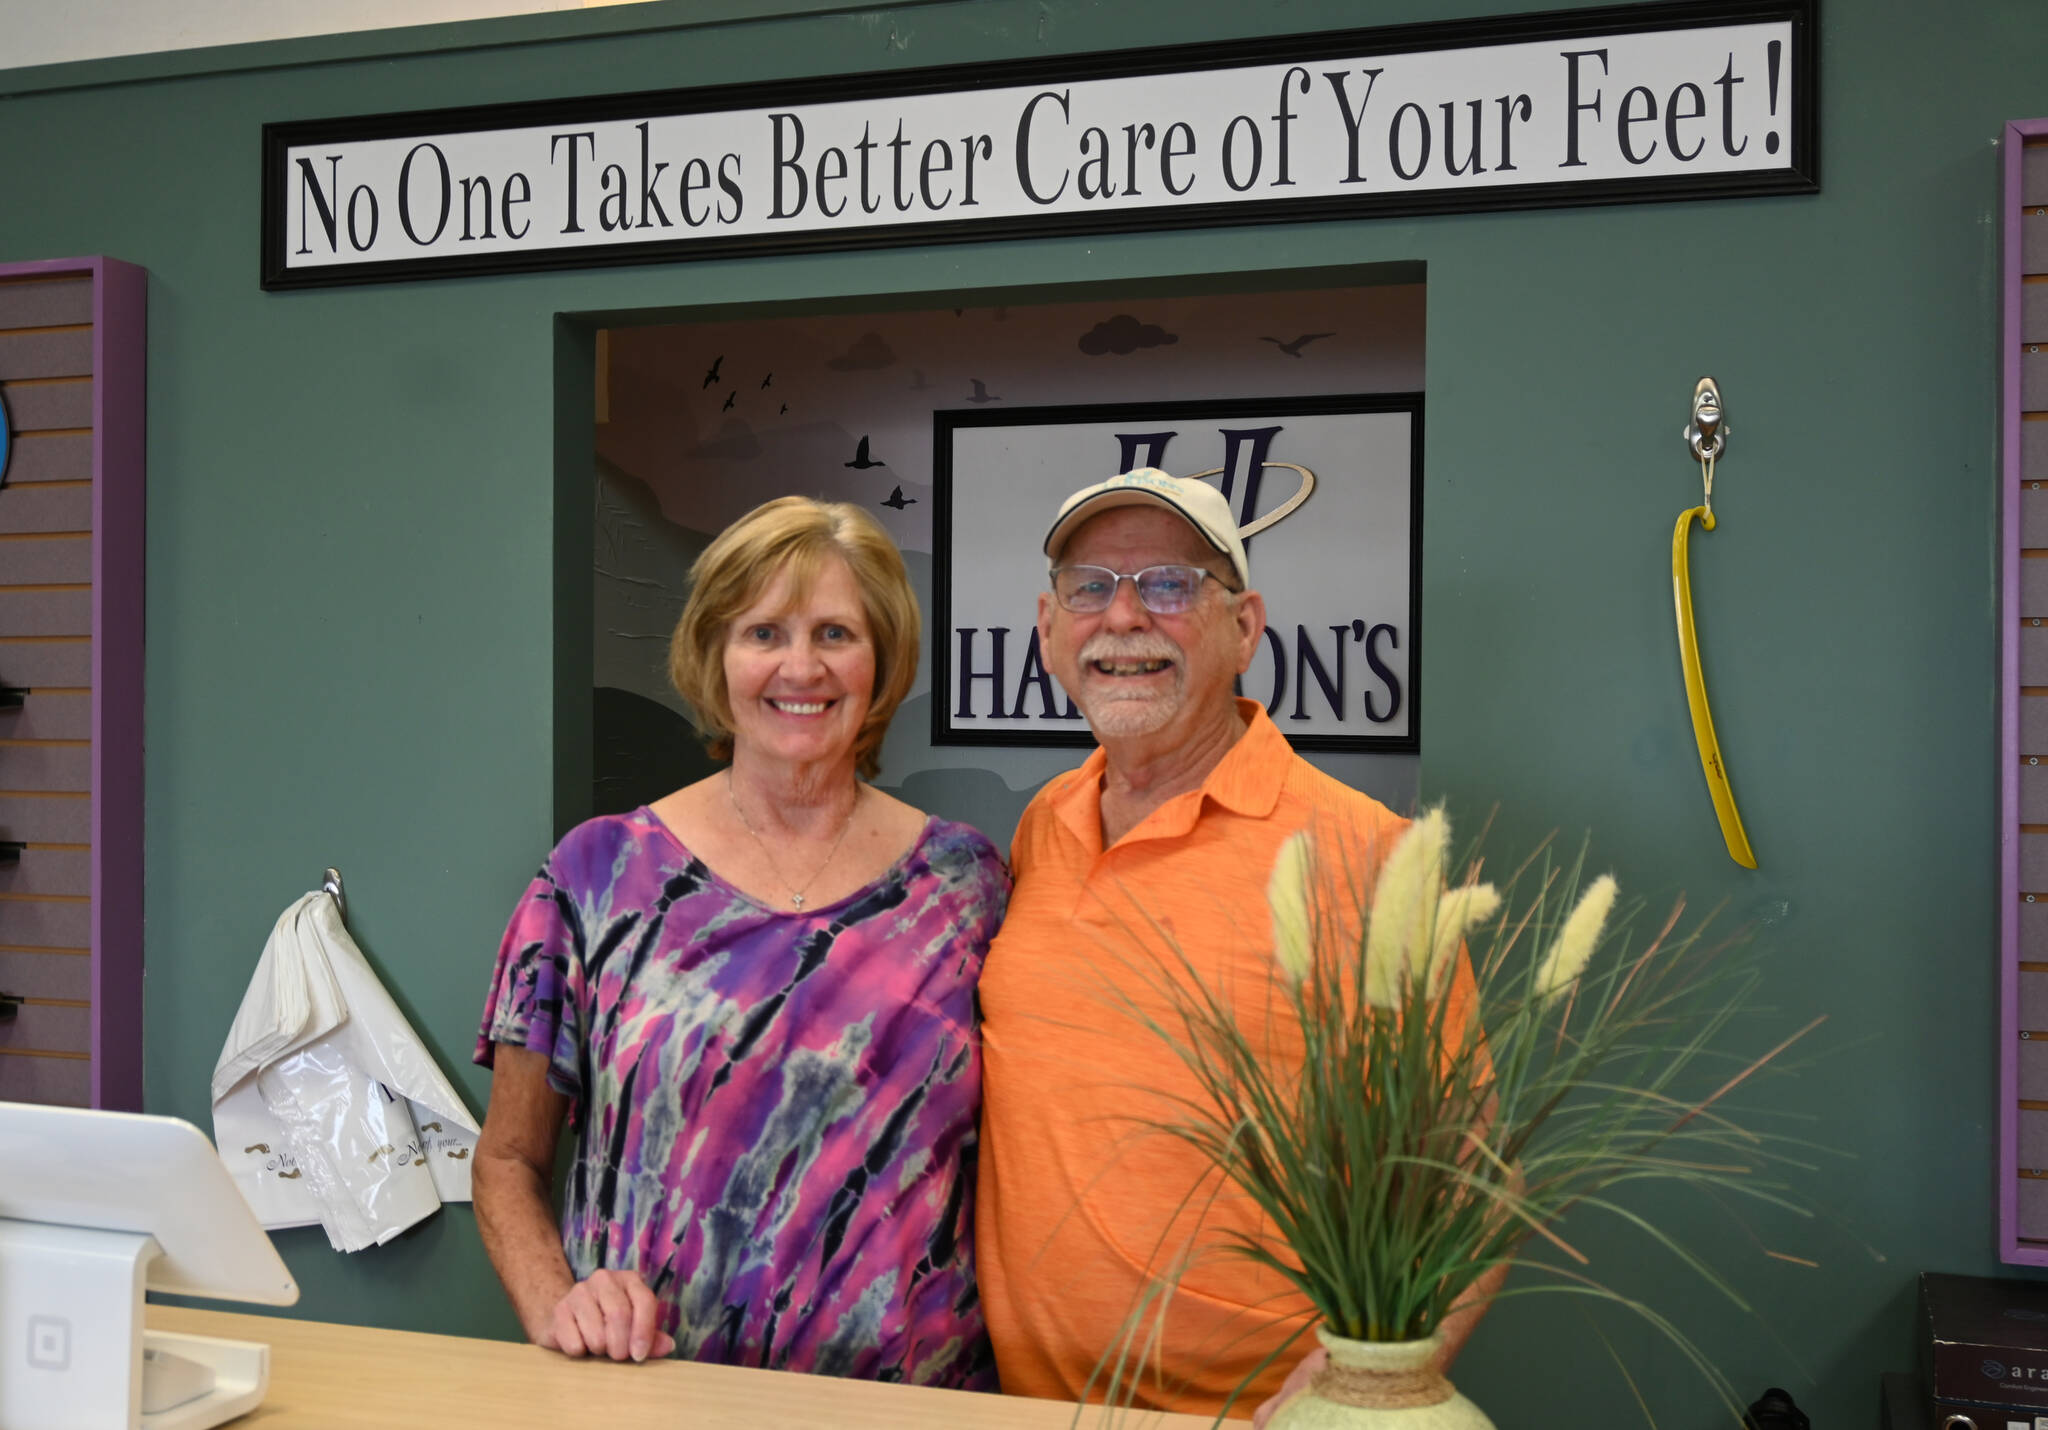 Sequim Gazette photo by Michael Dashiell
End of an era: Donna and Jon Harrison of Harrison’s Comfort Footwear are retiring, with ownership of the popular shoe store moving over to Beck’s Shoes this week.